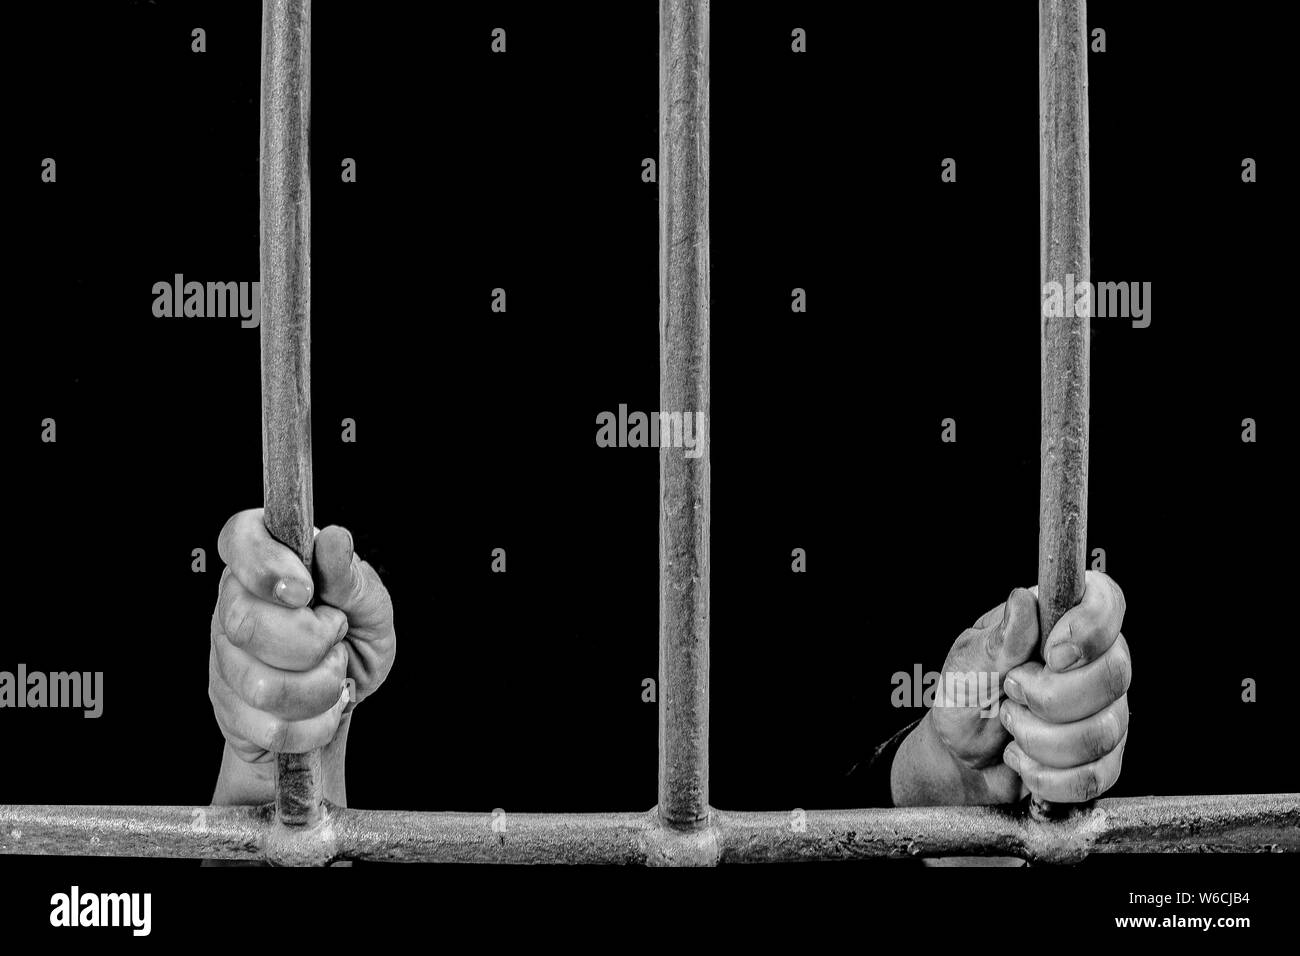 imprisoned in a dark prison holding the bars of a prison cell awaiting justice Stock Photo